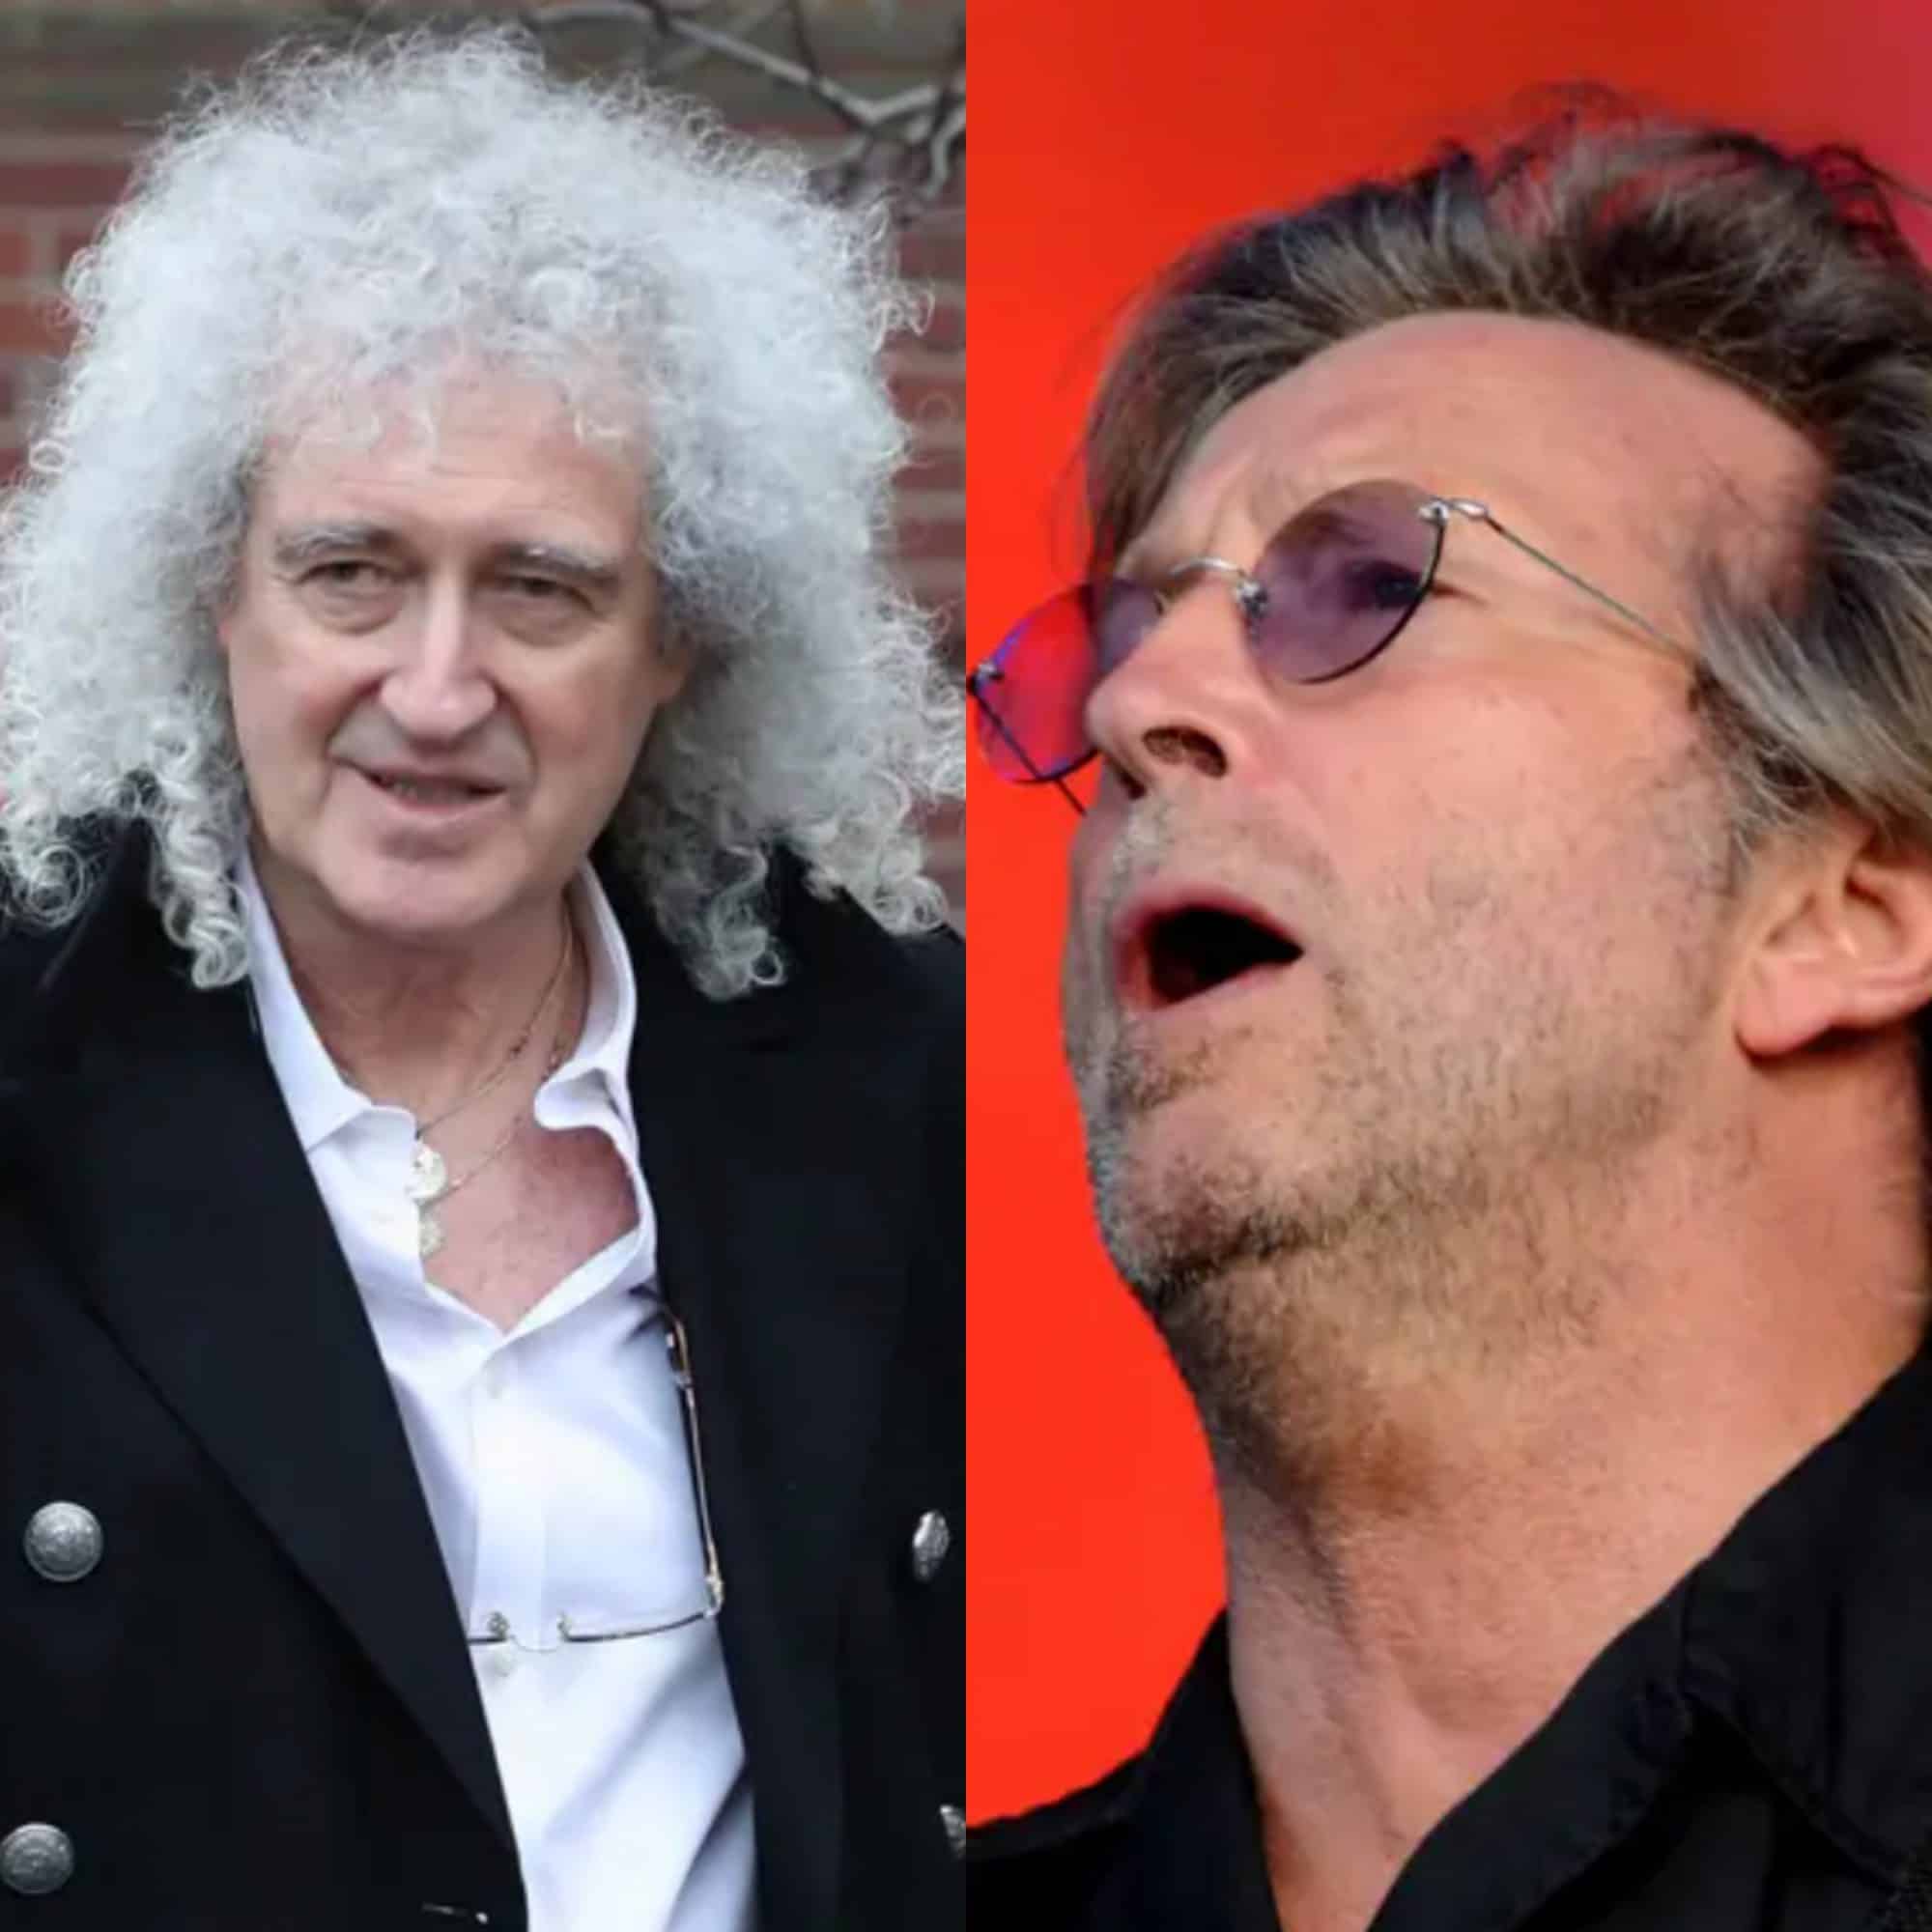 Queen legend Brian May labels Eric Clapton a ‘fruitcake’ for anti-vax views